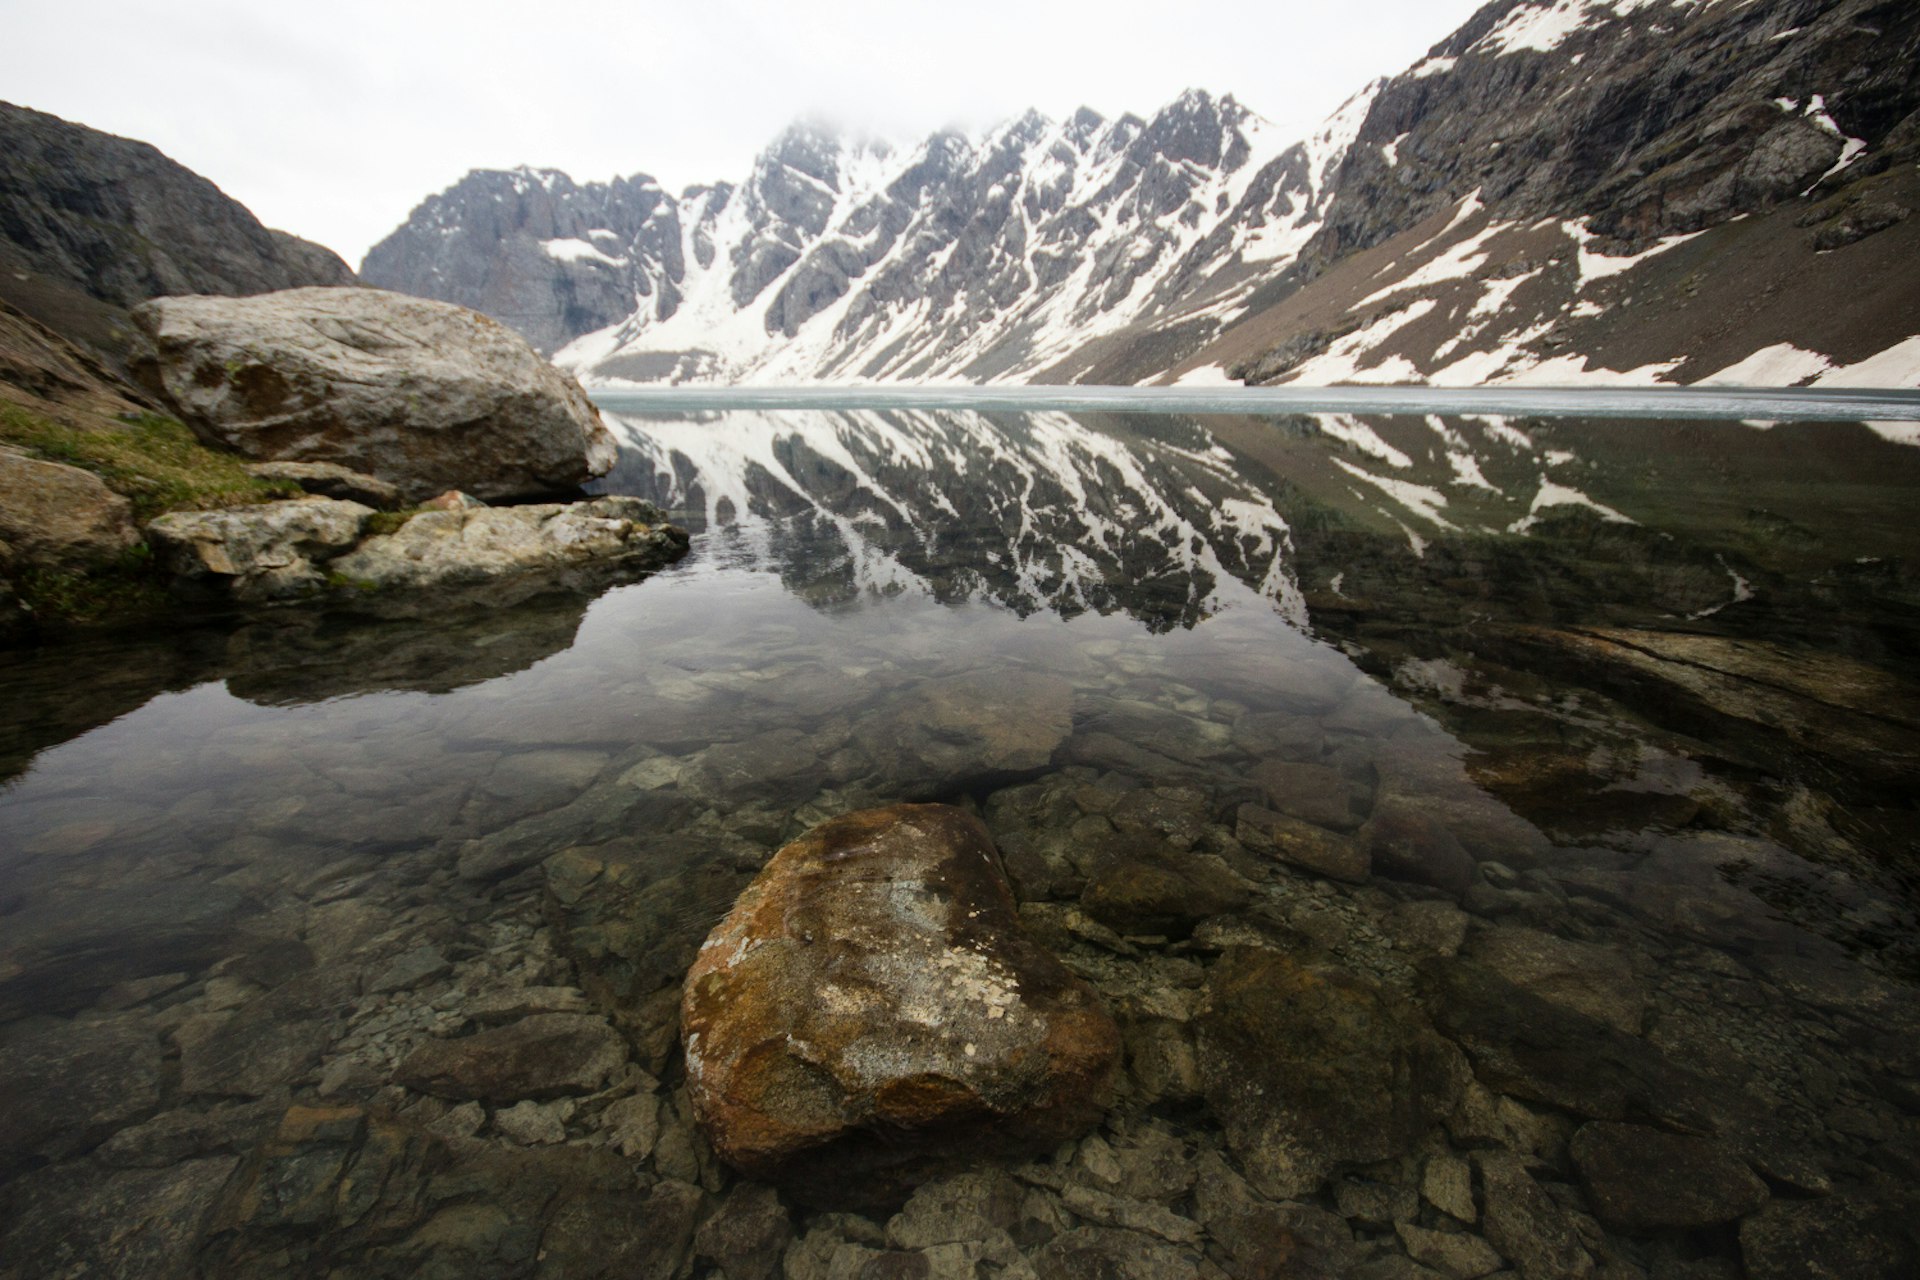 Ala-Köl: worth the steep, two-day climb. Image by Stephen Lioy / Lonely Planet